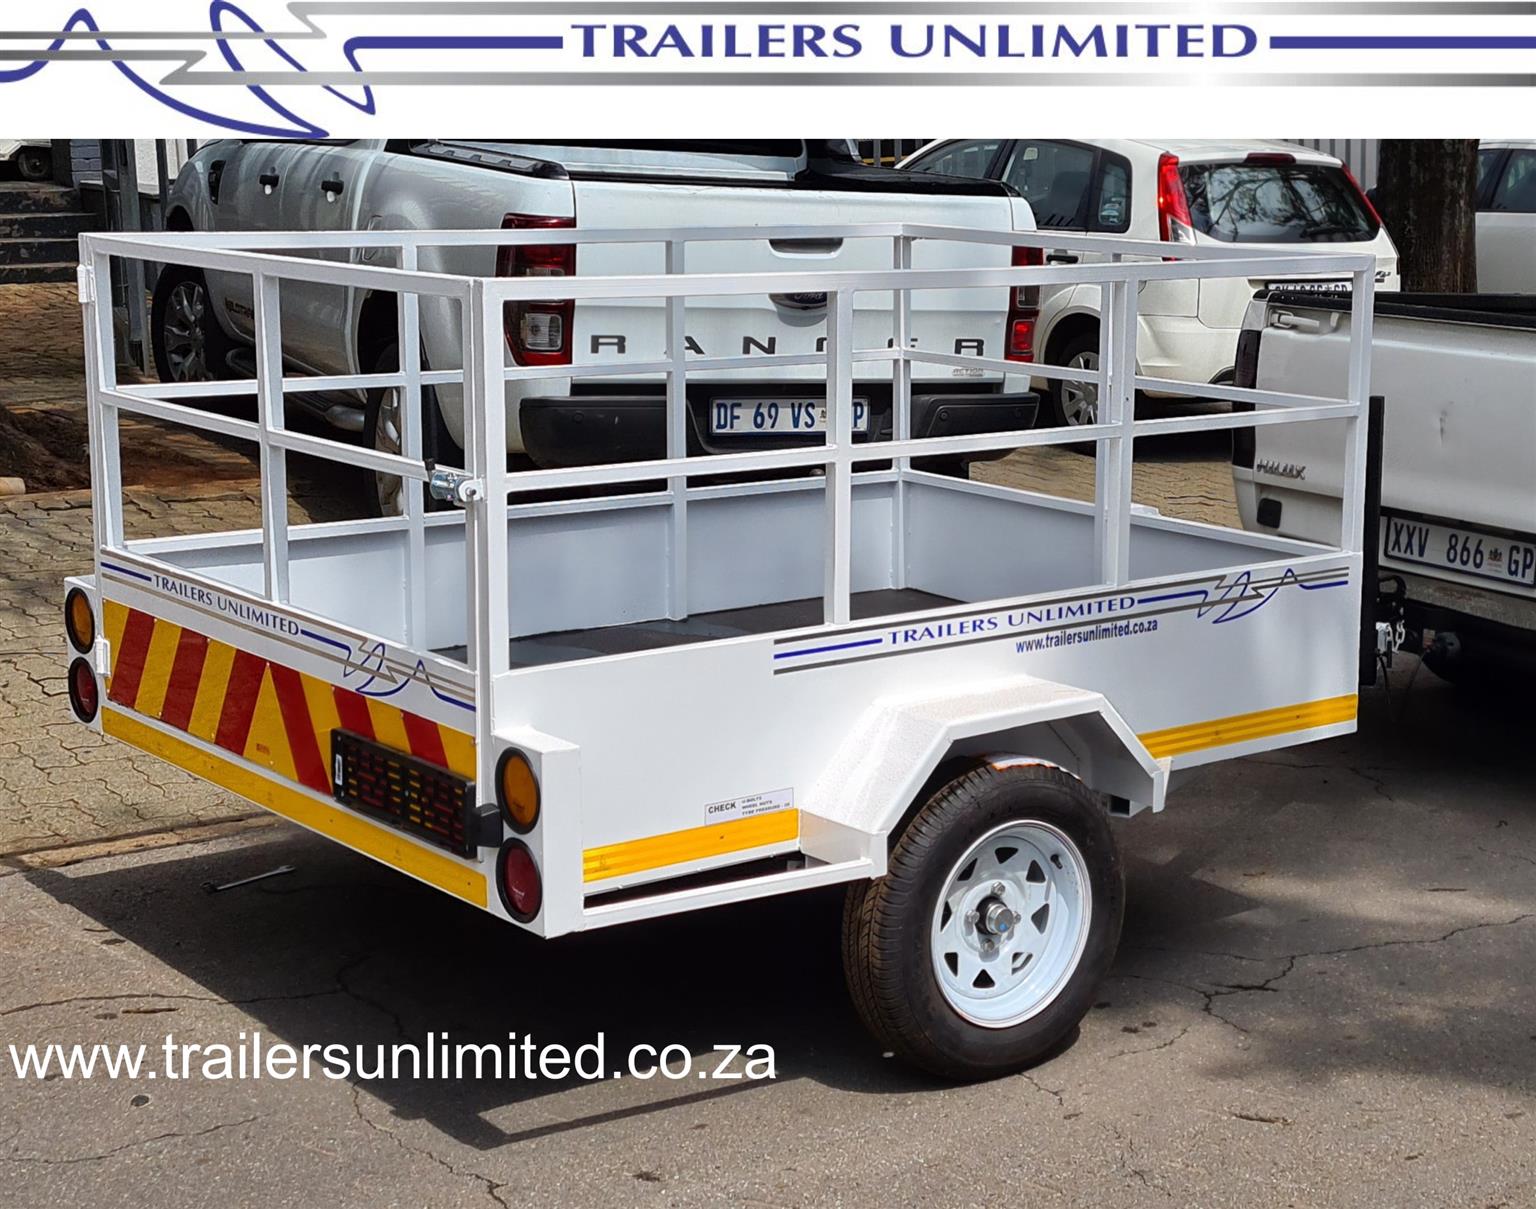 TRAILERS UNLIMITED UTILITY TRAILER